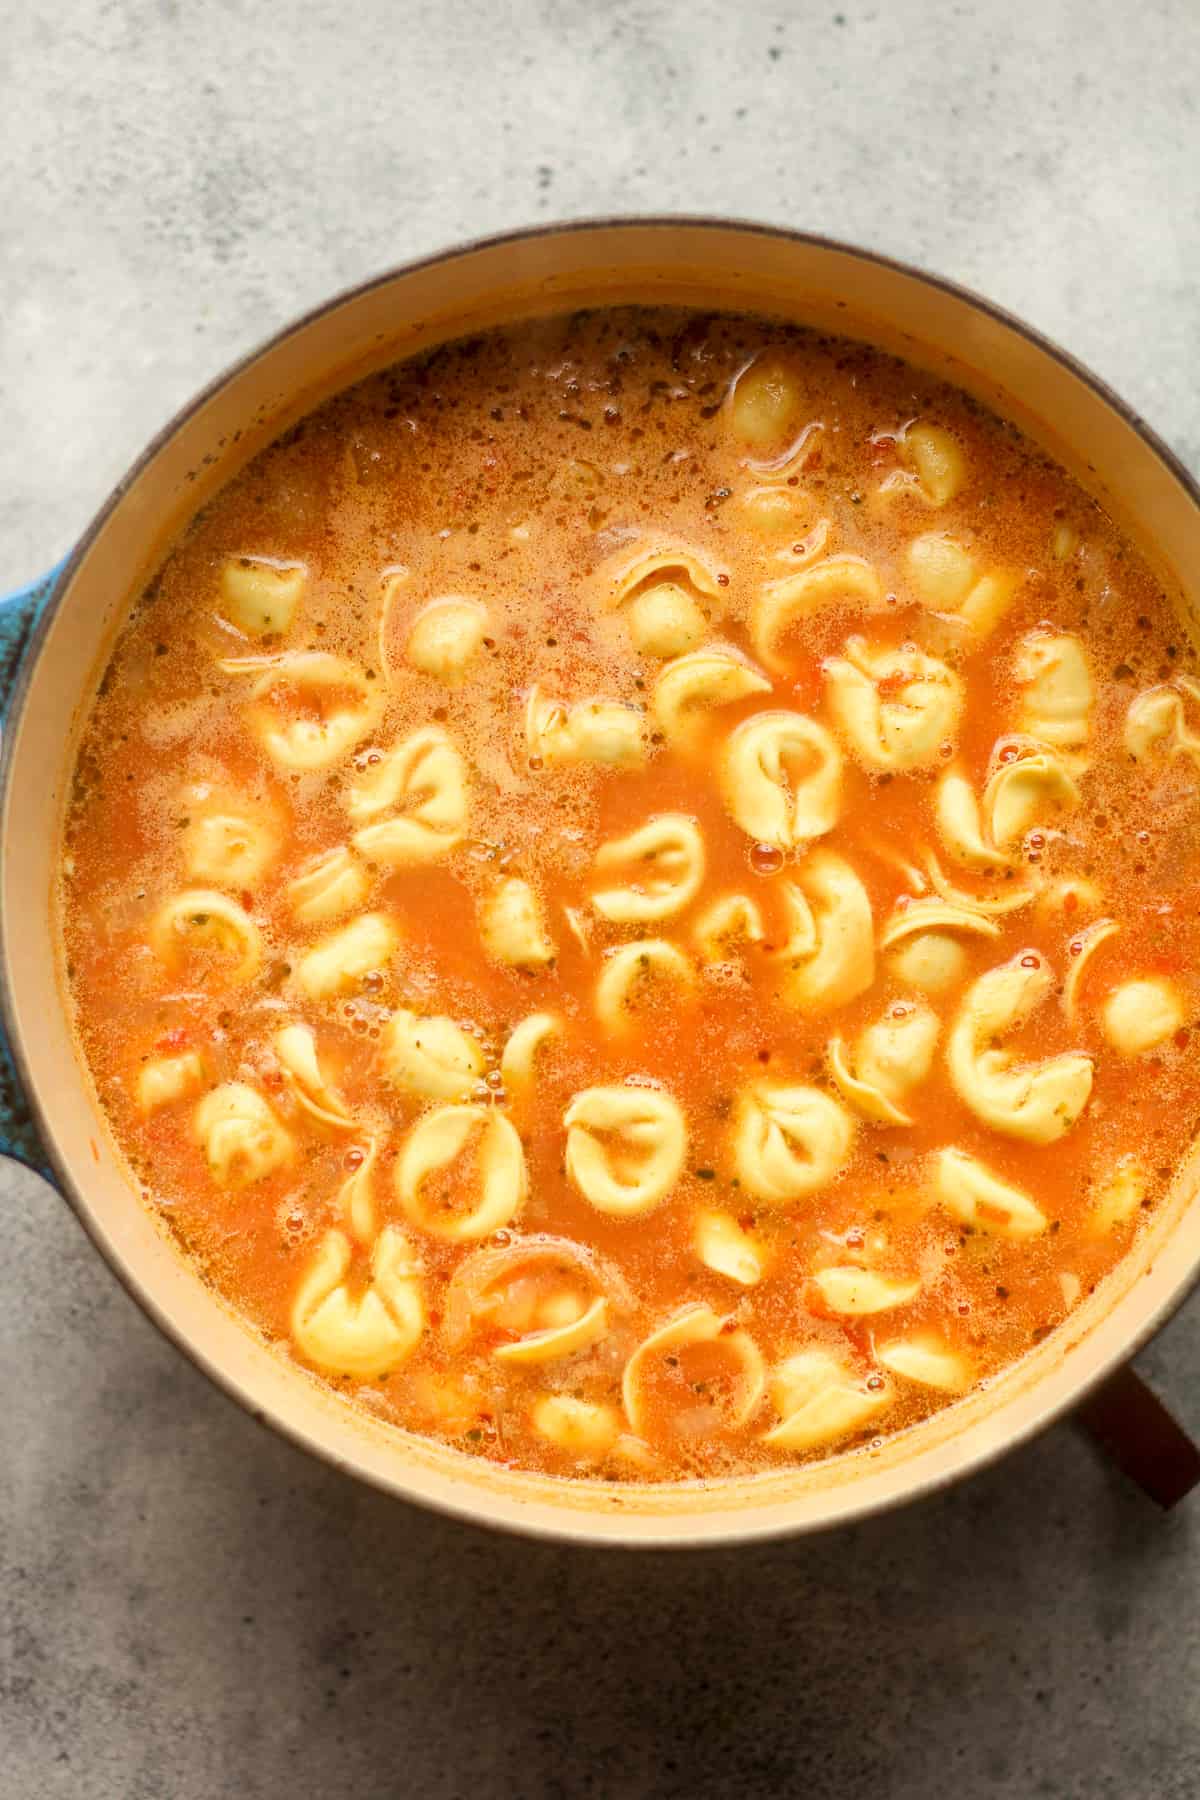 A pot of soup after adding tortellini.